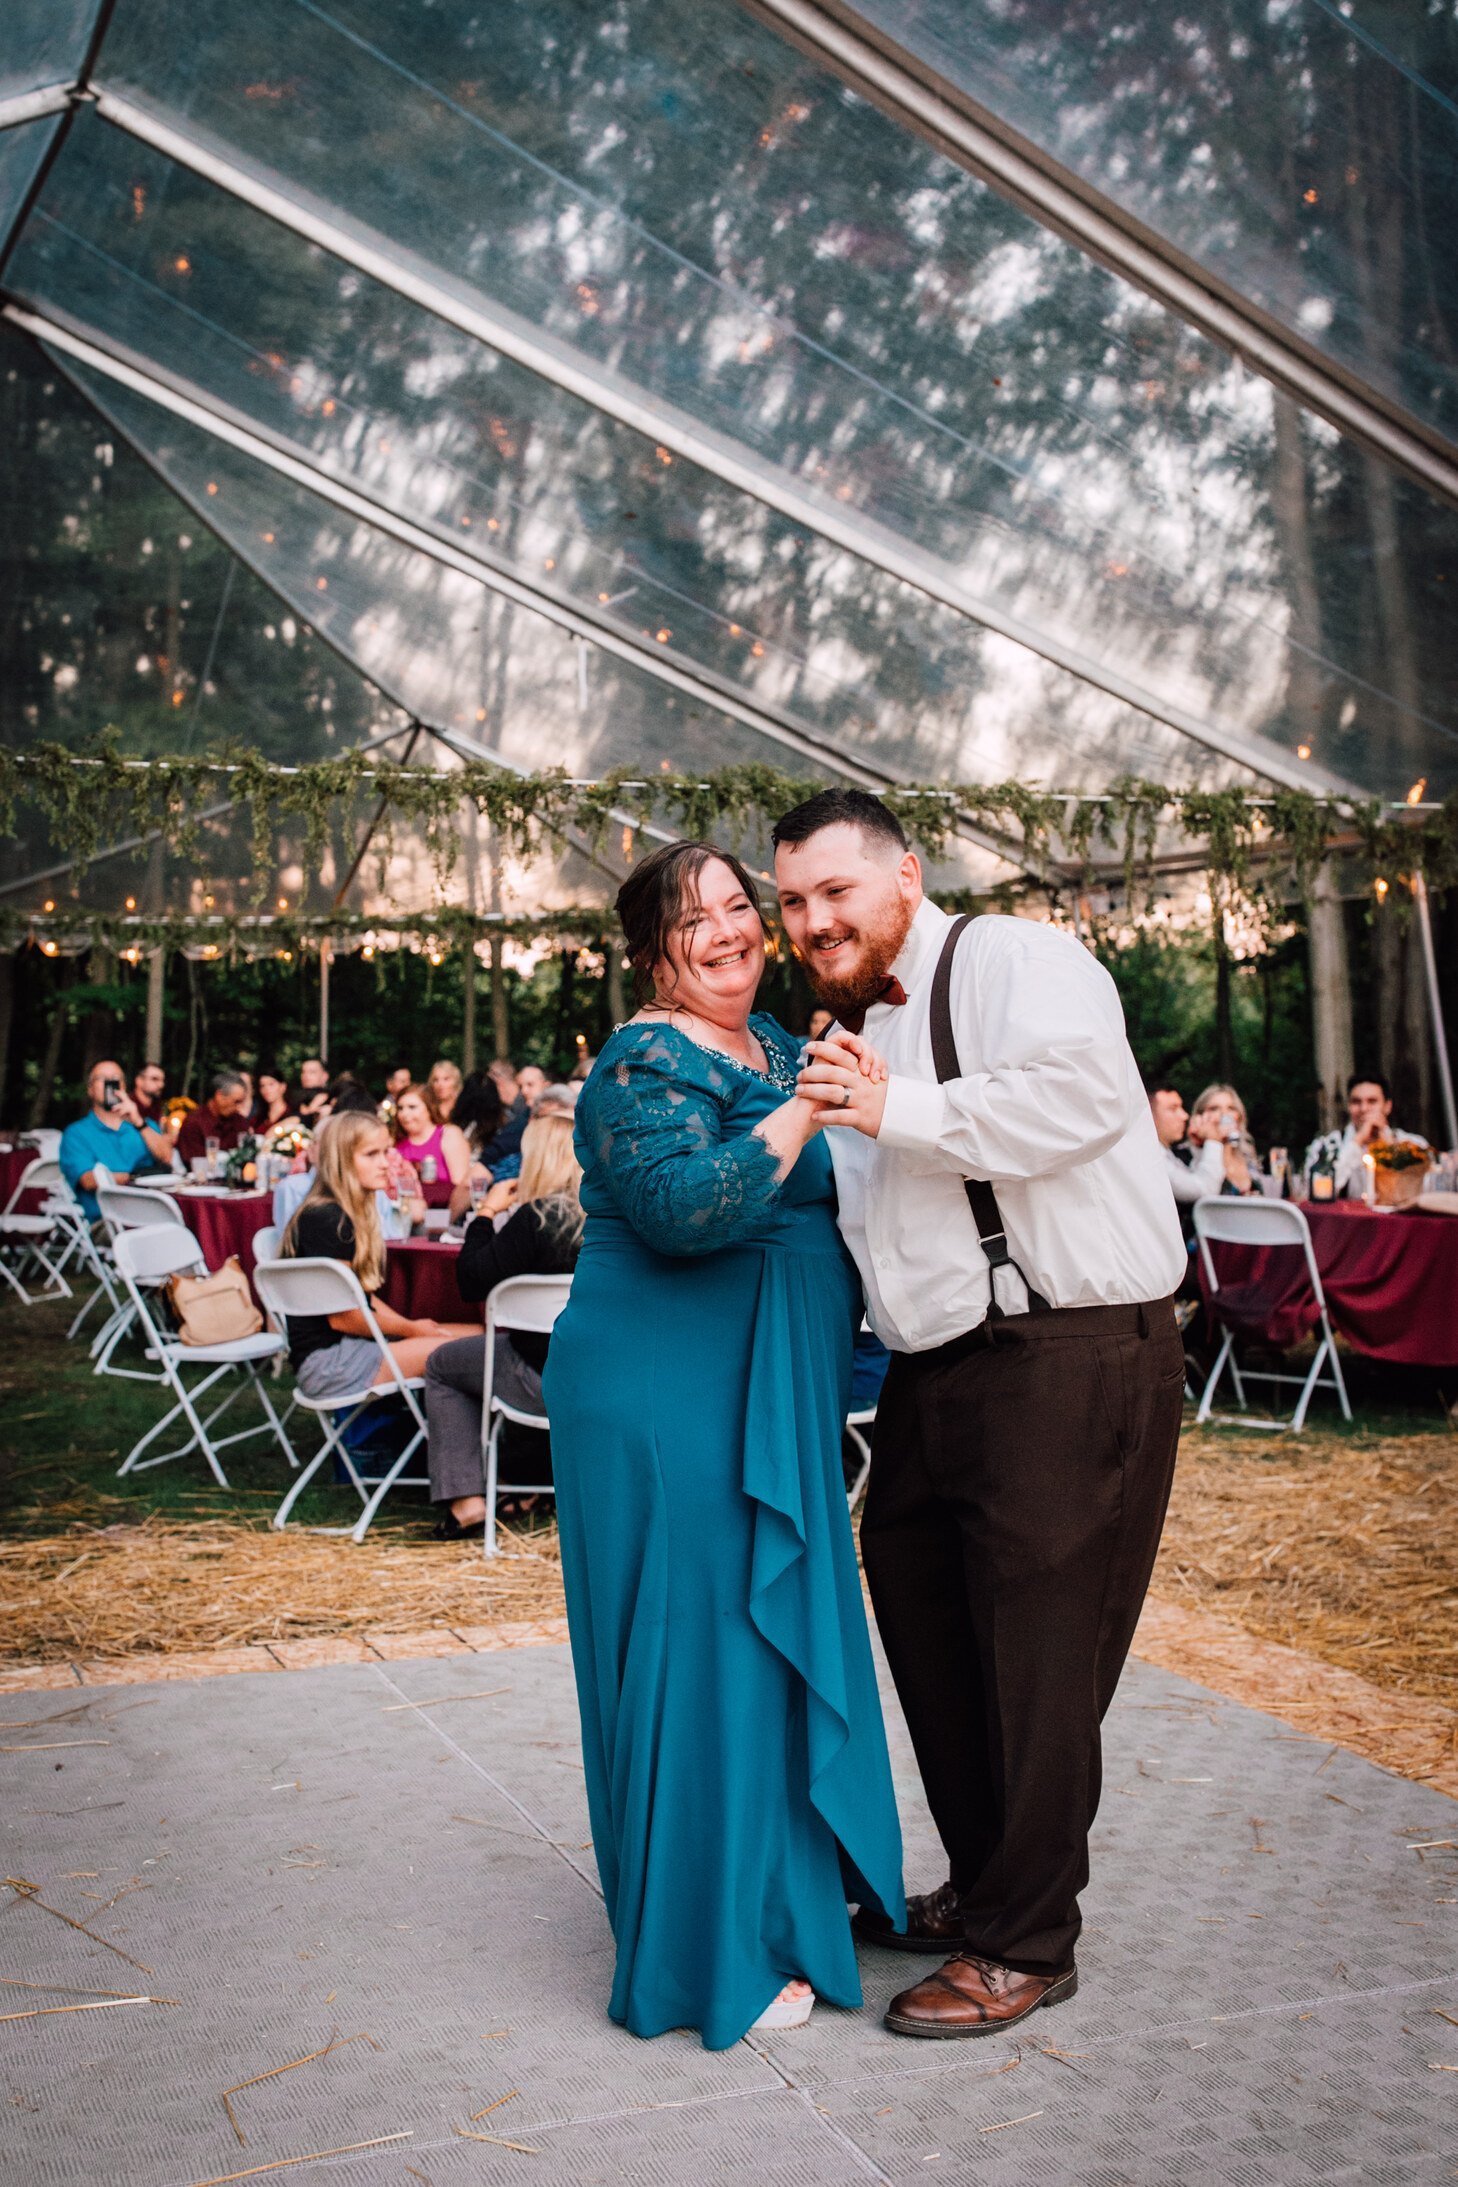  The groom dances with his mother at his outdoor fall wedding 